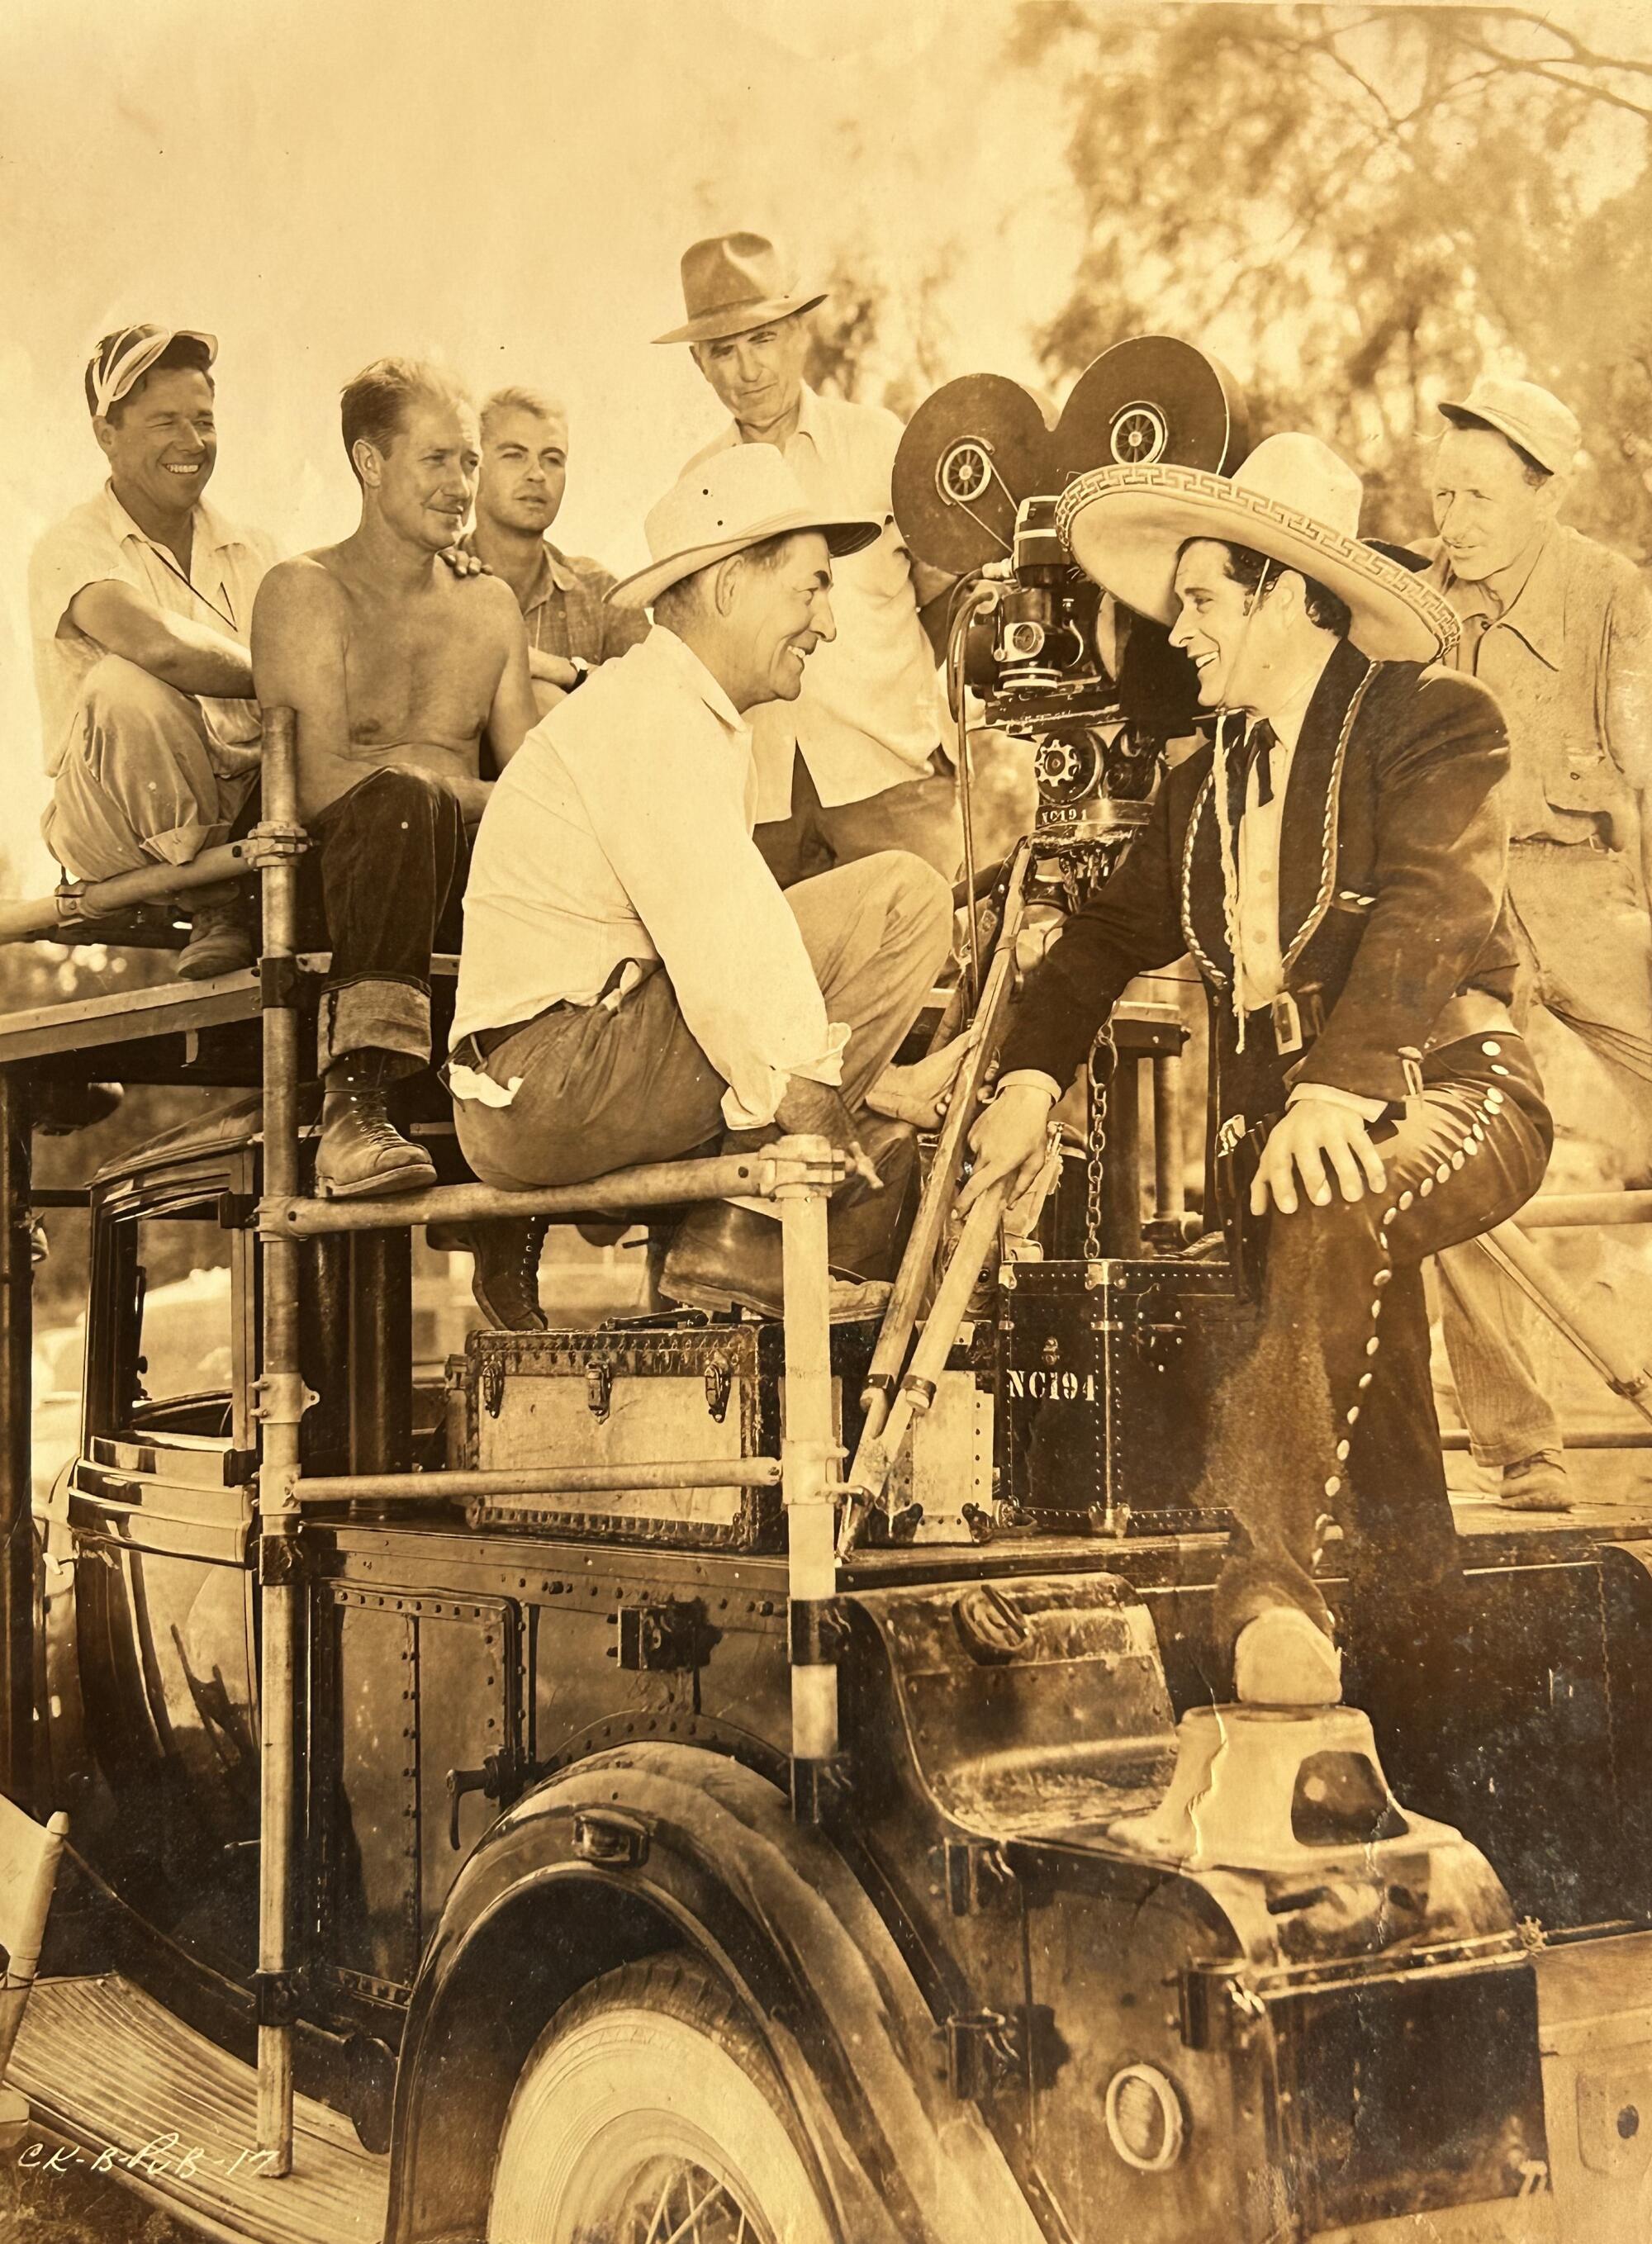 A movie director talks to an actor in a charro costume in a photo from the early days of Hollywood